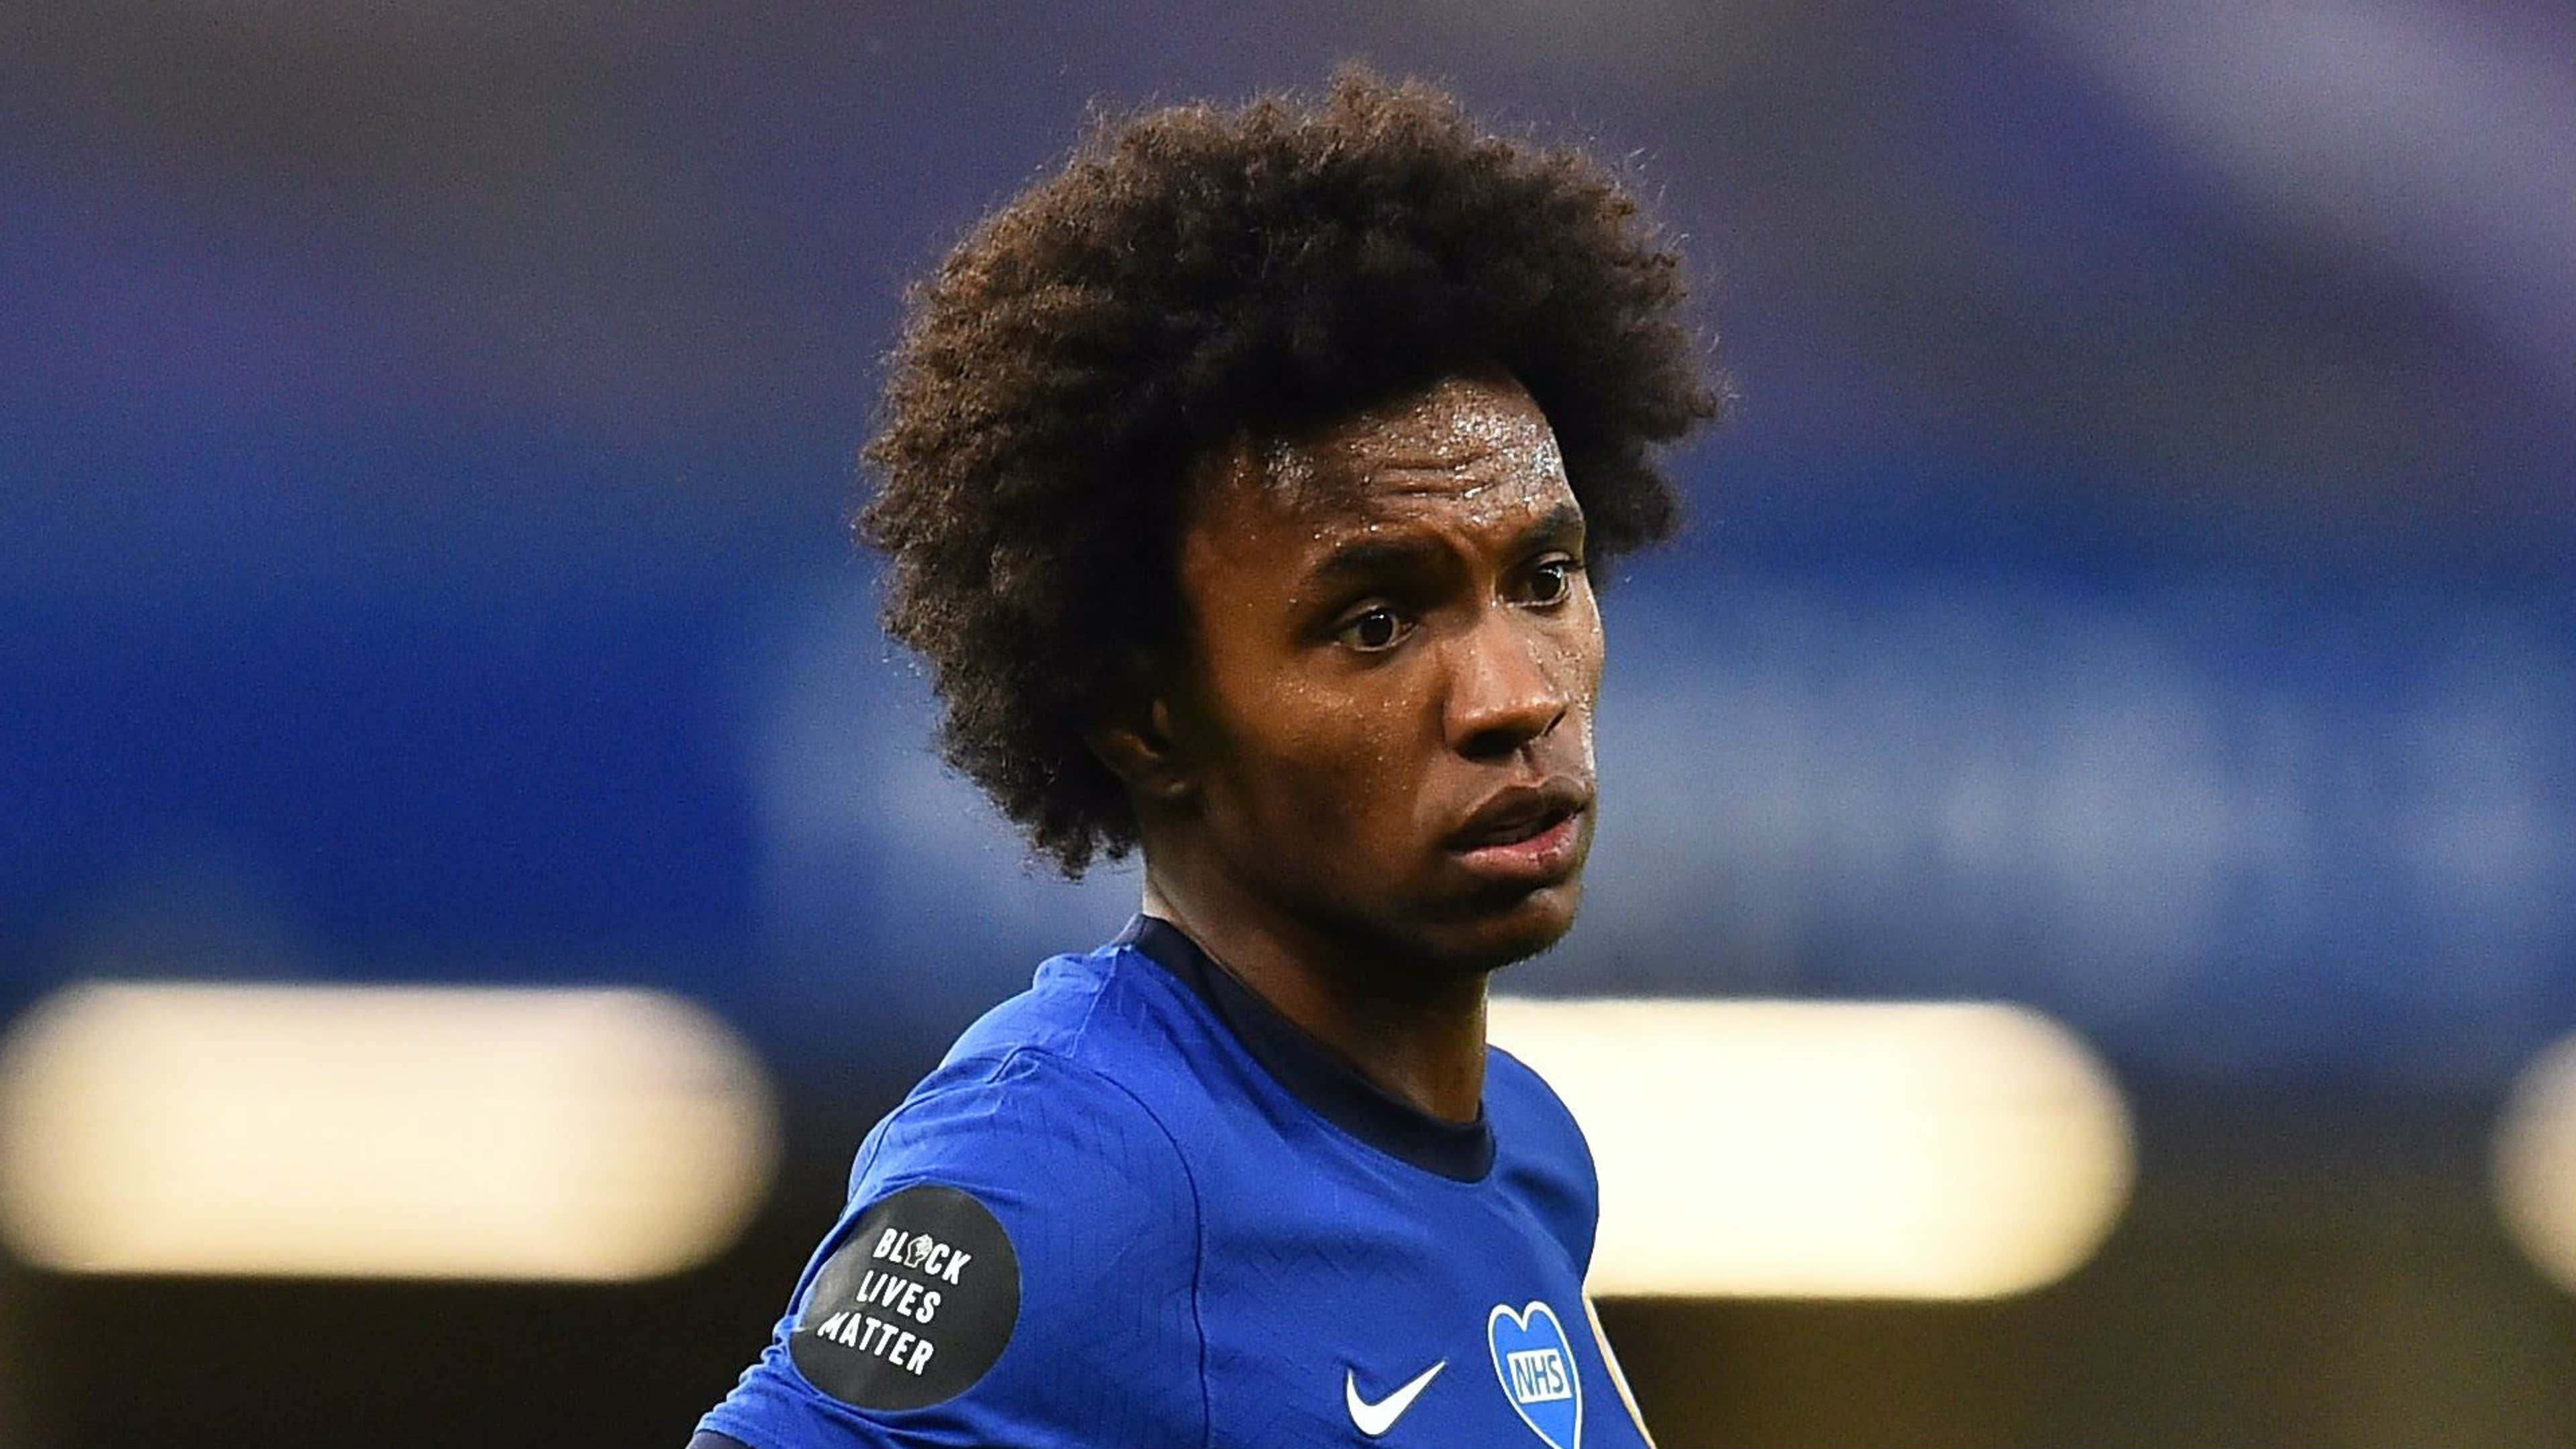 time has come to move on' - Willian confirms departure with letter to fans | Goal.com